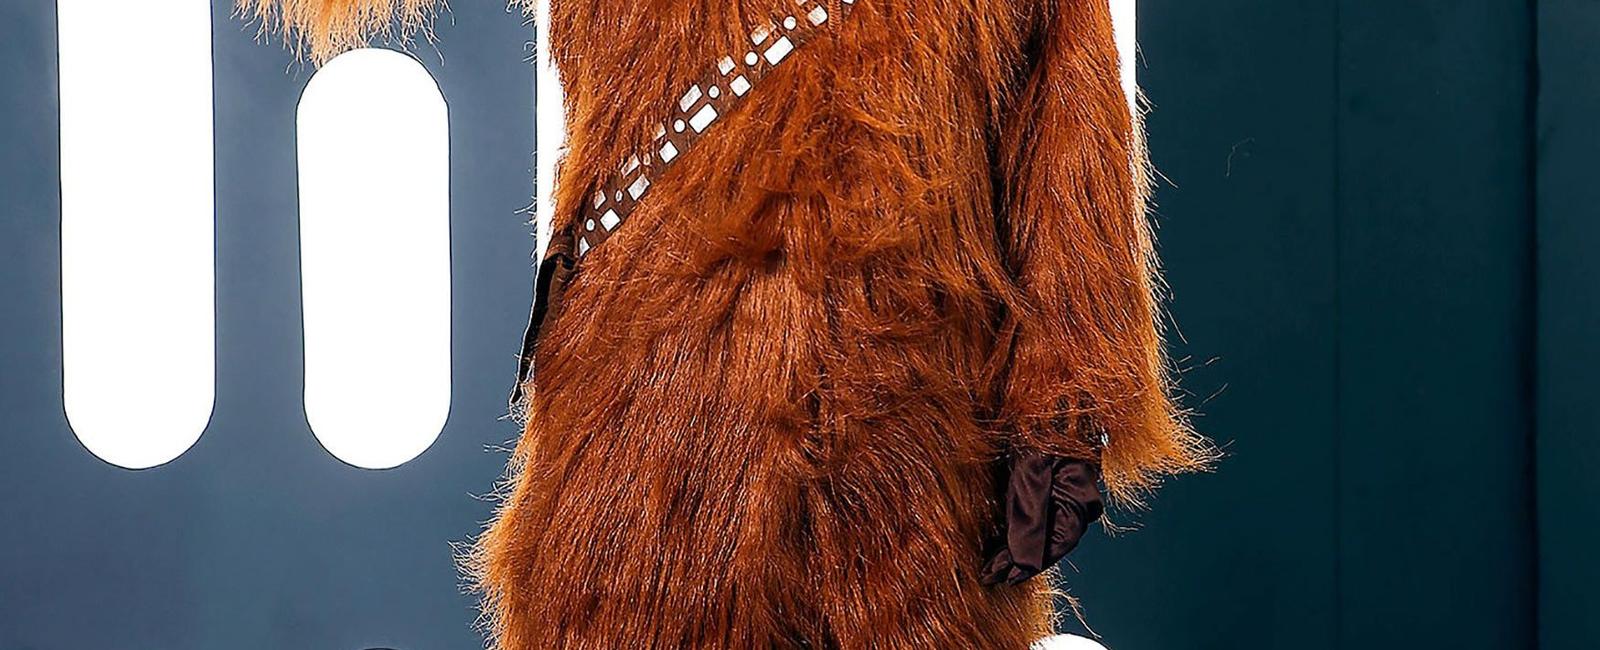 The wookie suits in star wars the force awakens was 7 5 feet tall and it took over 6 months to build the 4 5 suits needed for filming